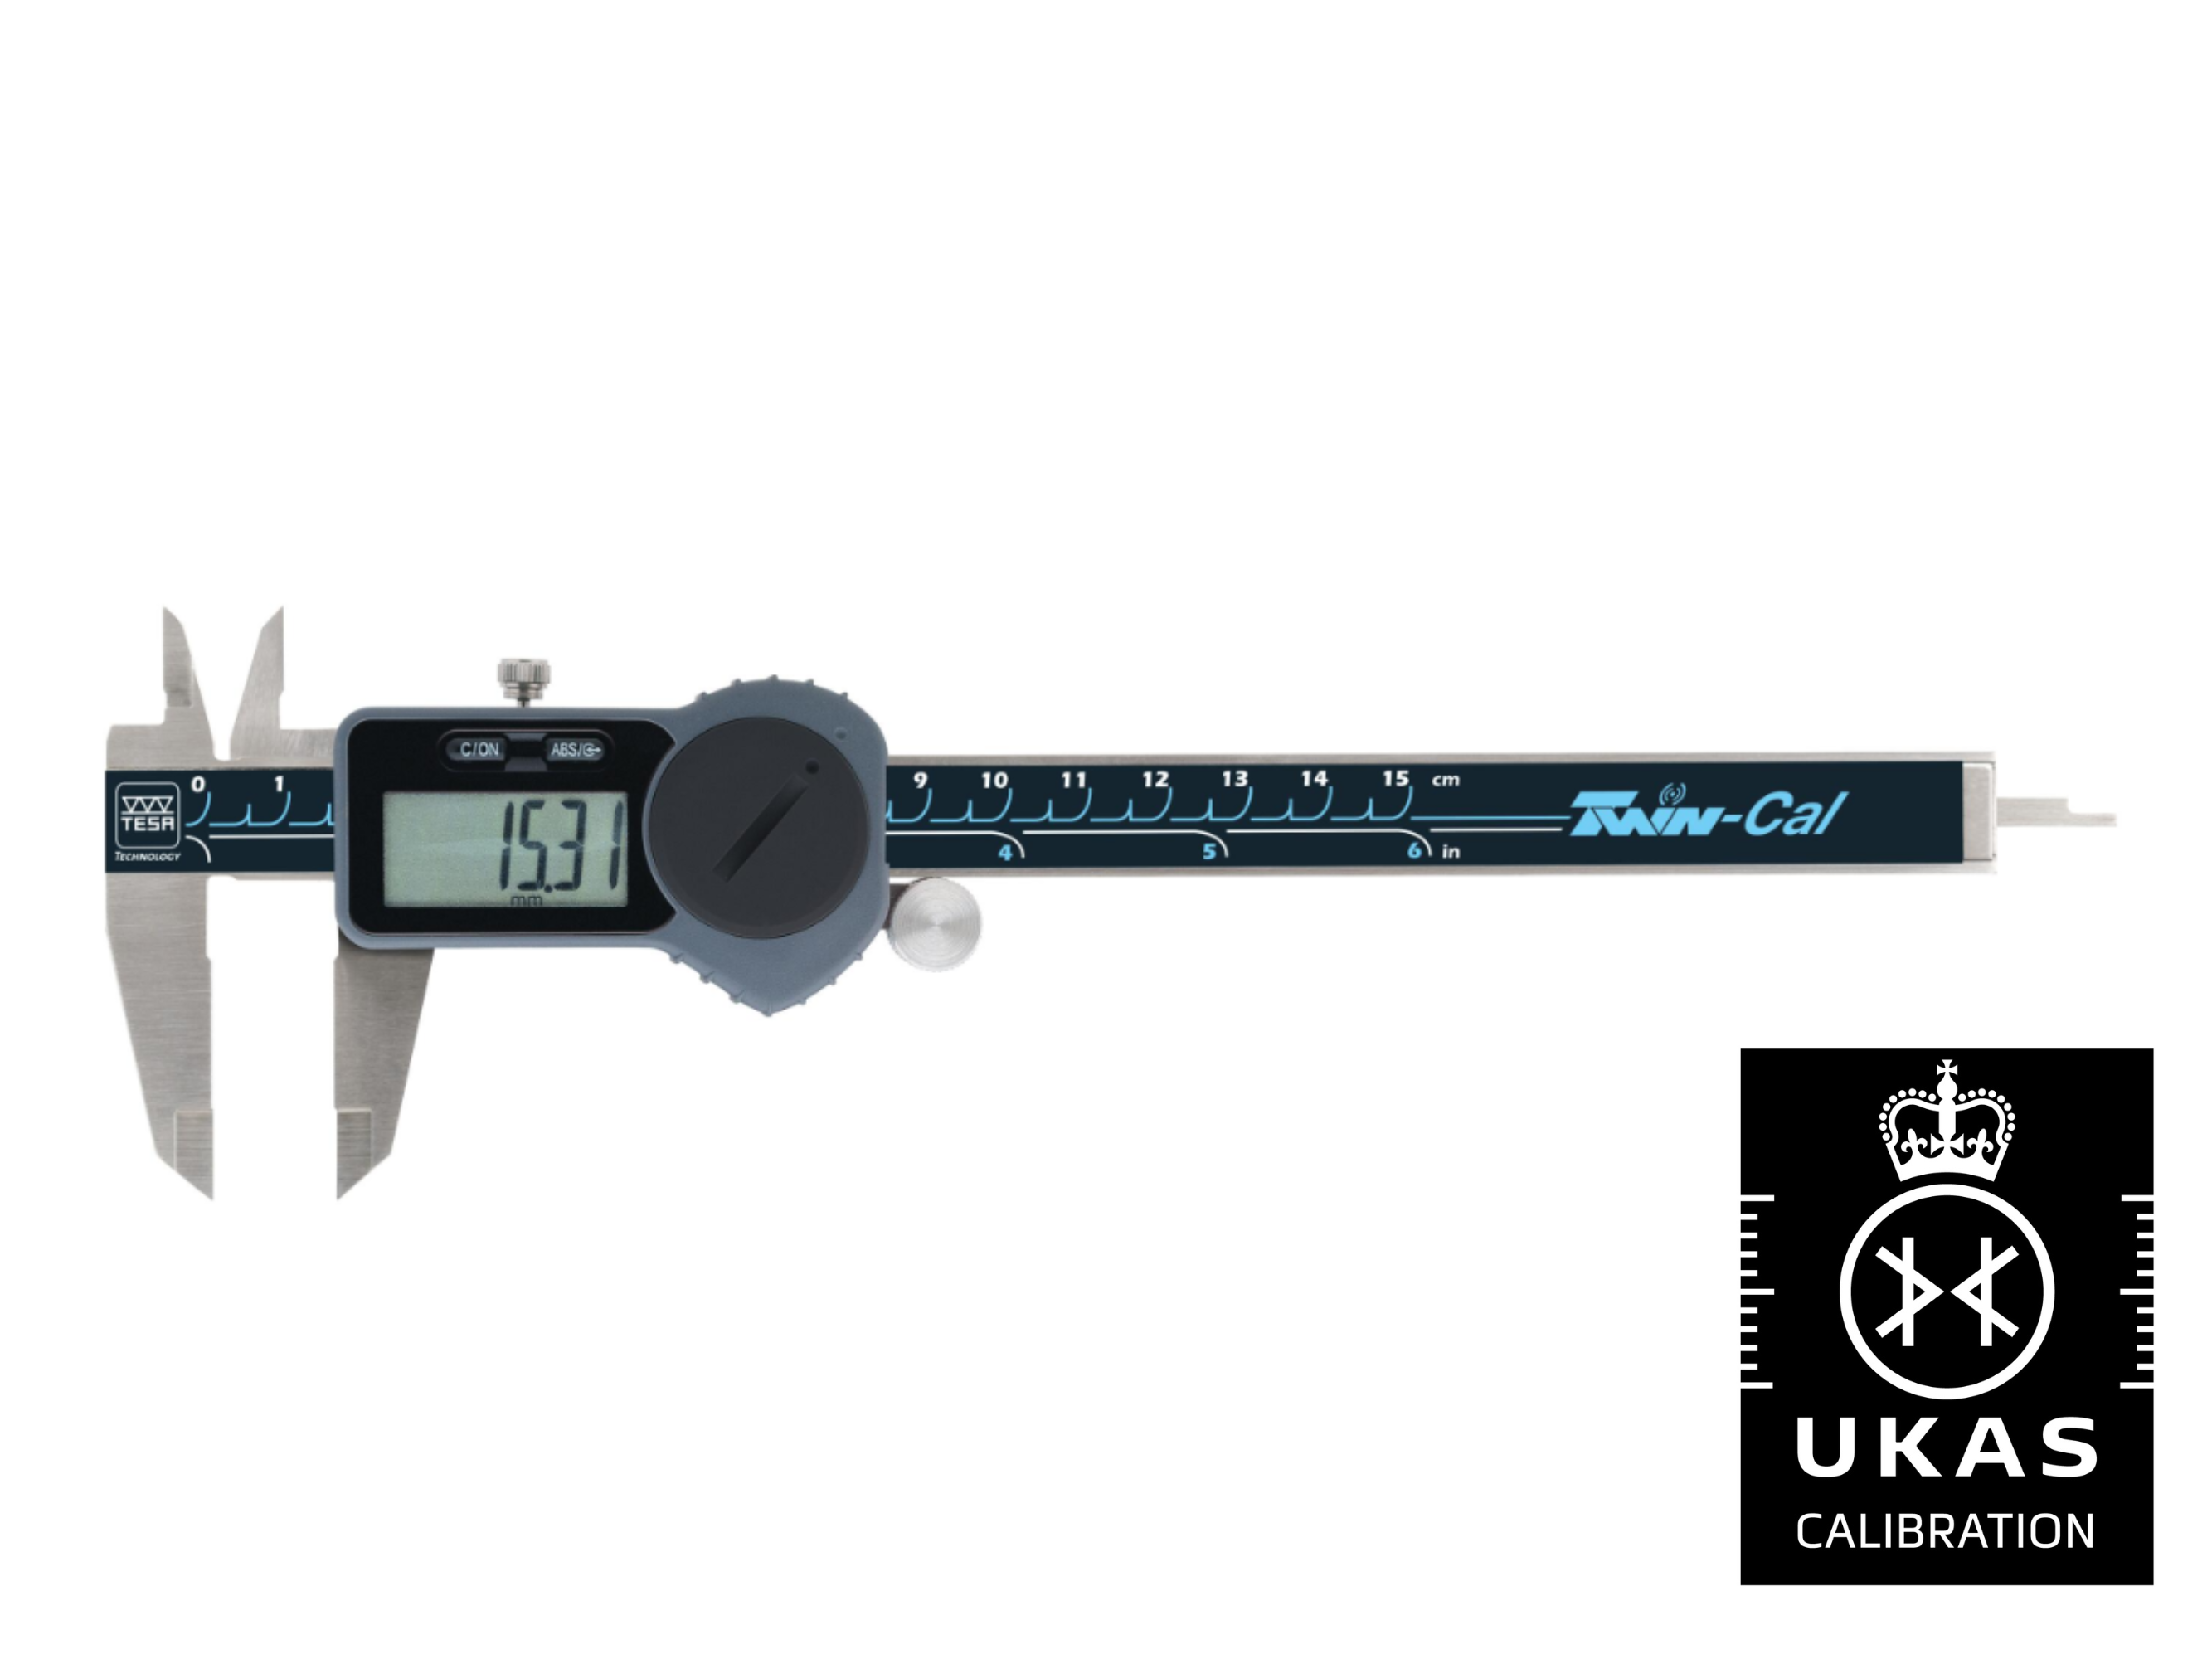 Tesa TWIN-CAL Universal Digital Calipers 0-150mm (Round Depth Rod with thumb roller) 00530094  with UKAS calibration